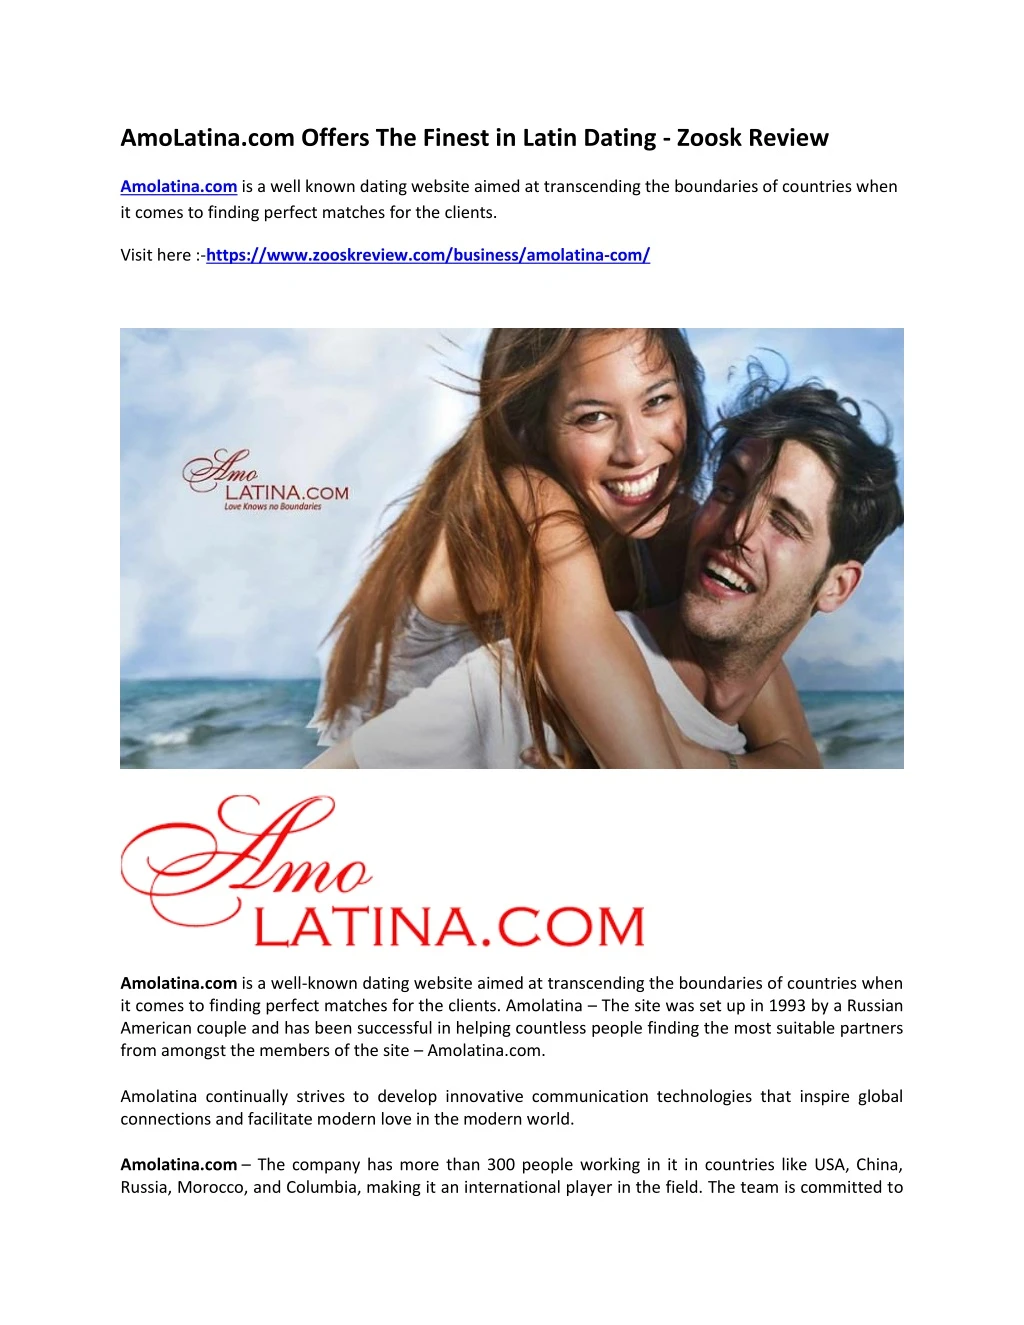 amolatina com offers the finest in latin dating